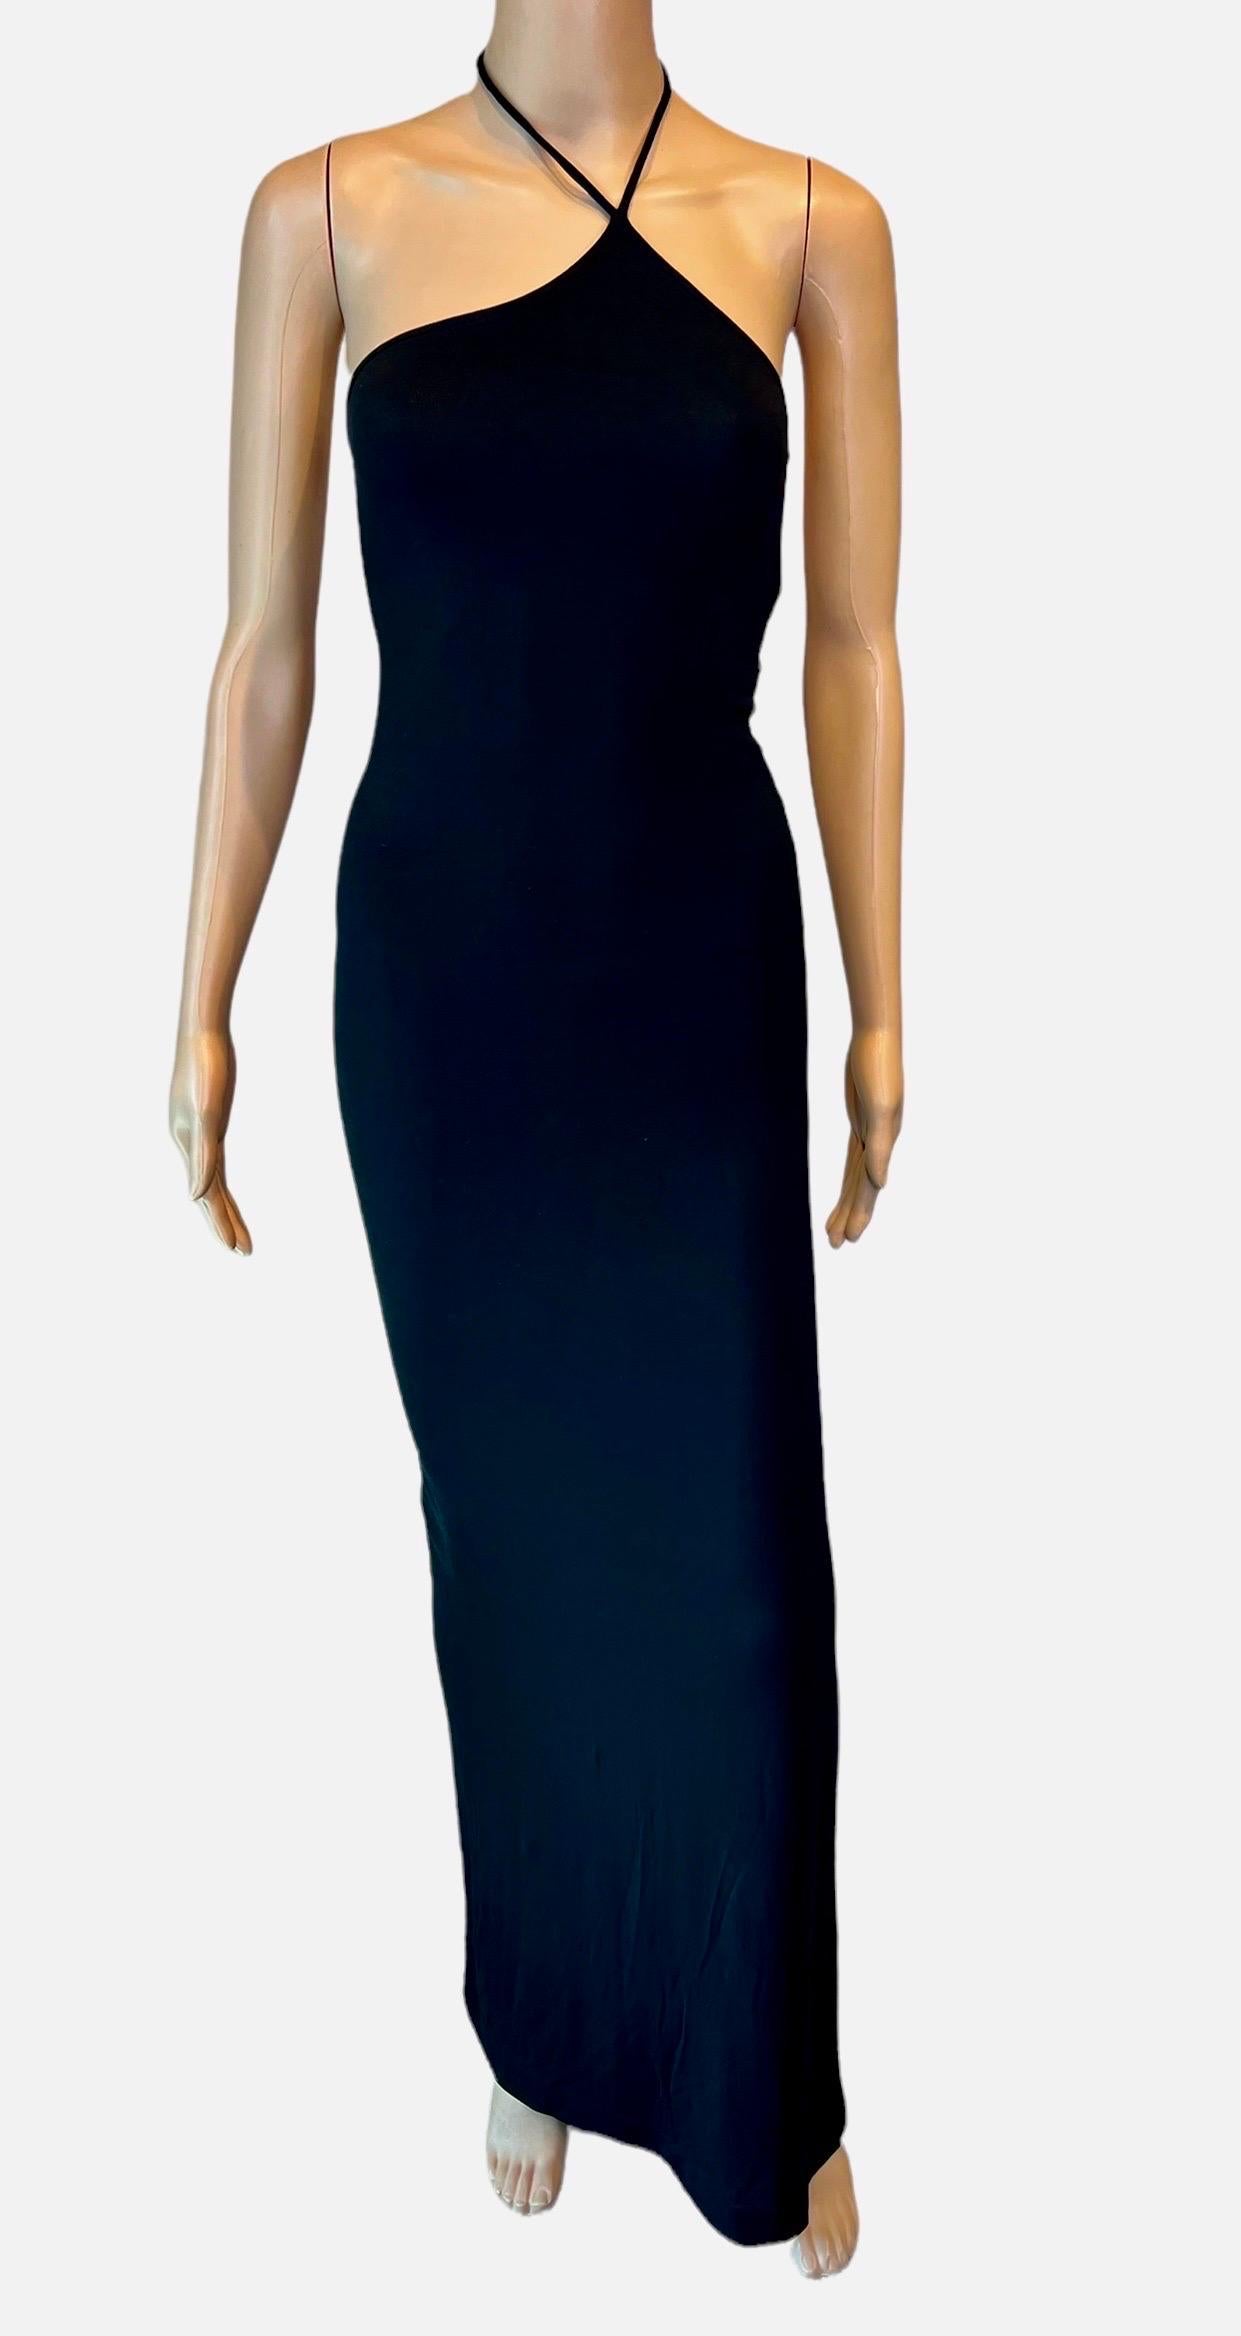 Tom Ford for Gucci F/W 1997 Asymmetrical Halter Bodycon Black Evening Dress Gown In Good Condition For Sale In Naples, FL